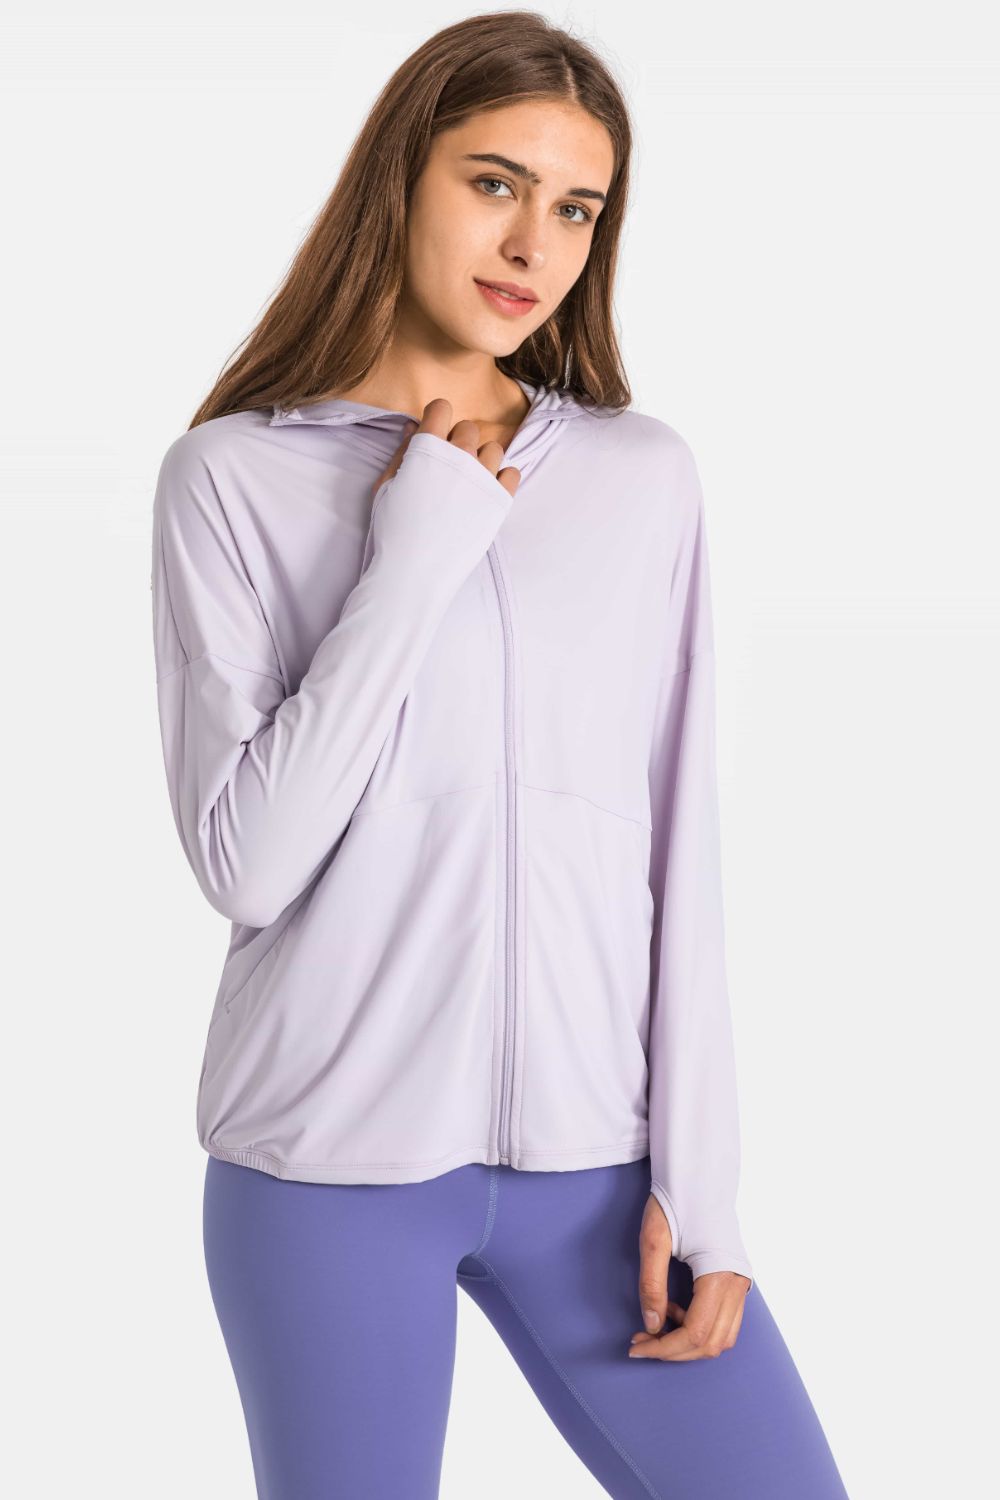 Lavender Sweat Now Shine Later Zip Up Dropped Shoulder Hooded Sports Jacket activewear